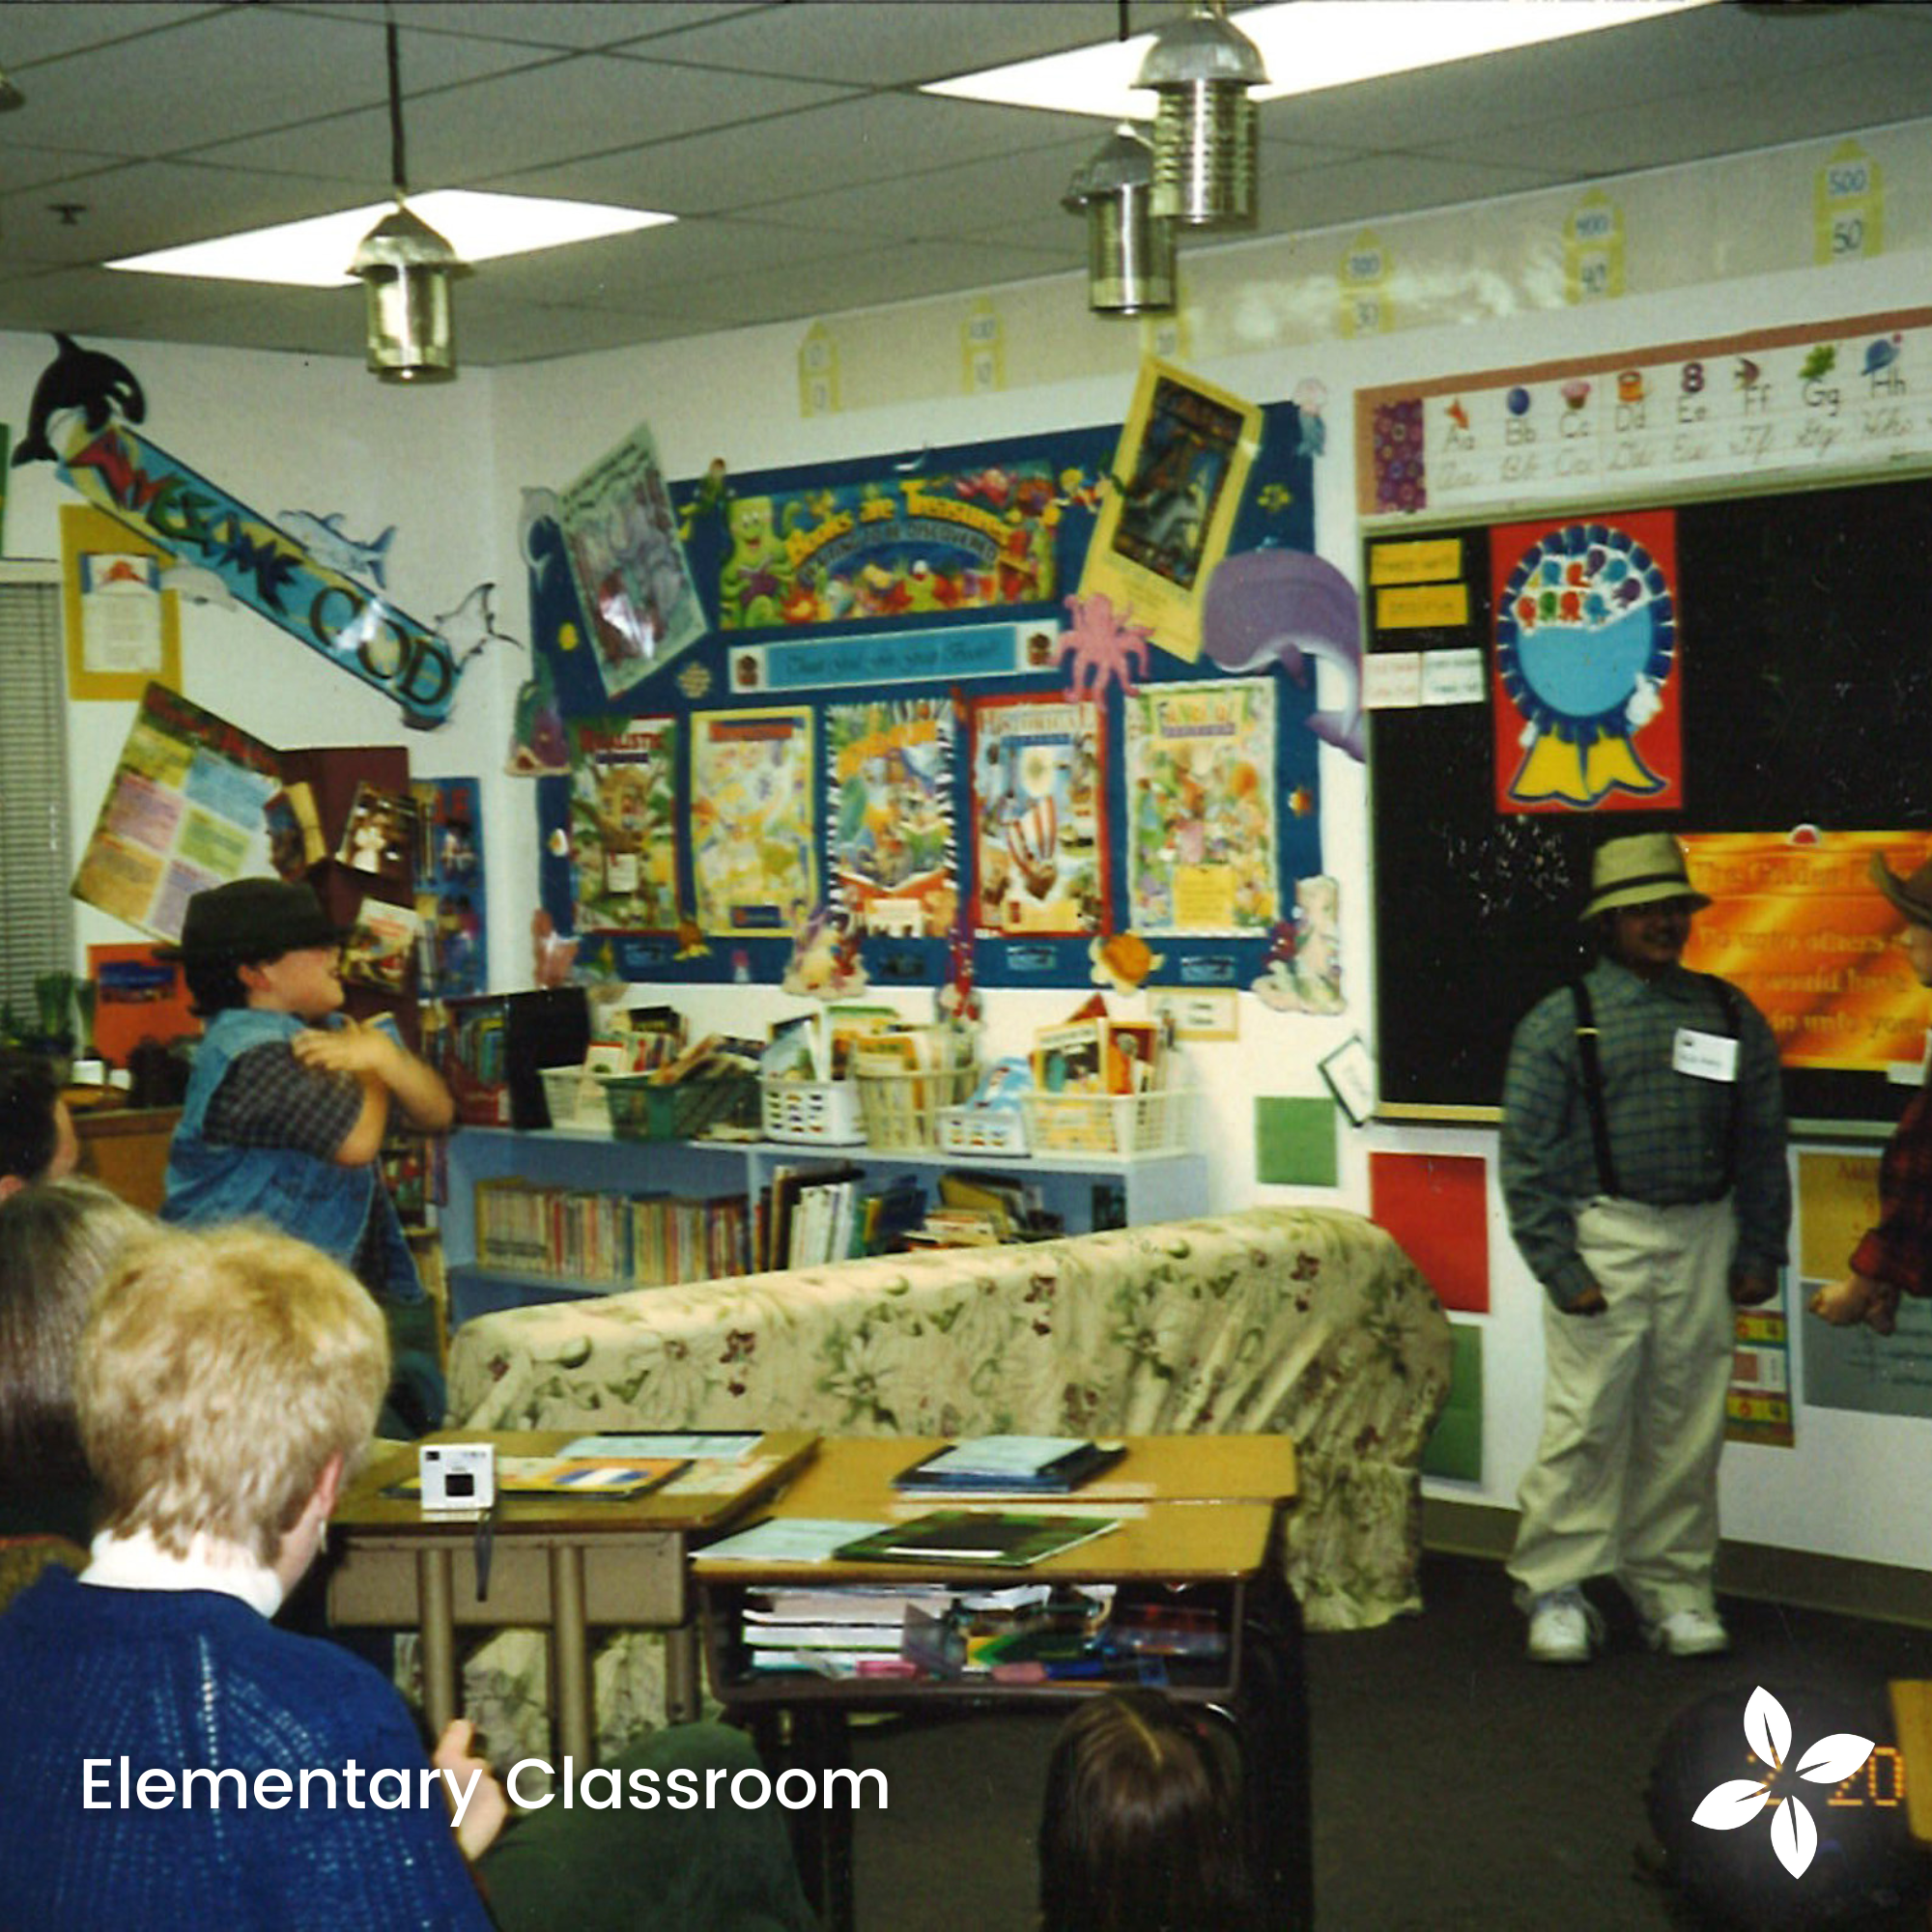 Old SCS elementary classroom